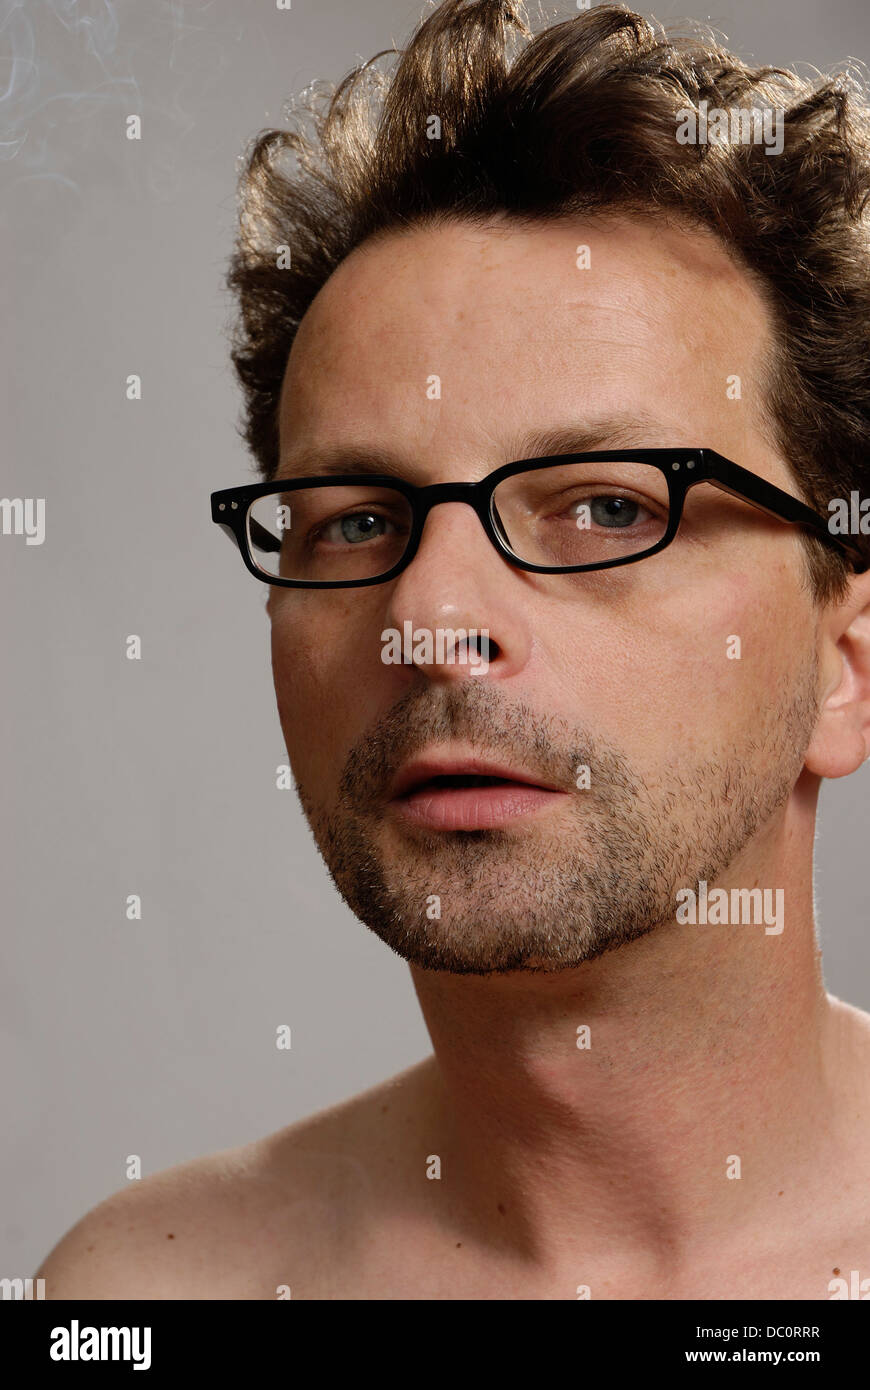 A man with glasses, no shirt and unshaven Stock Photo